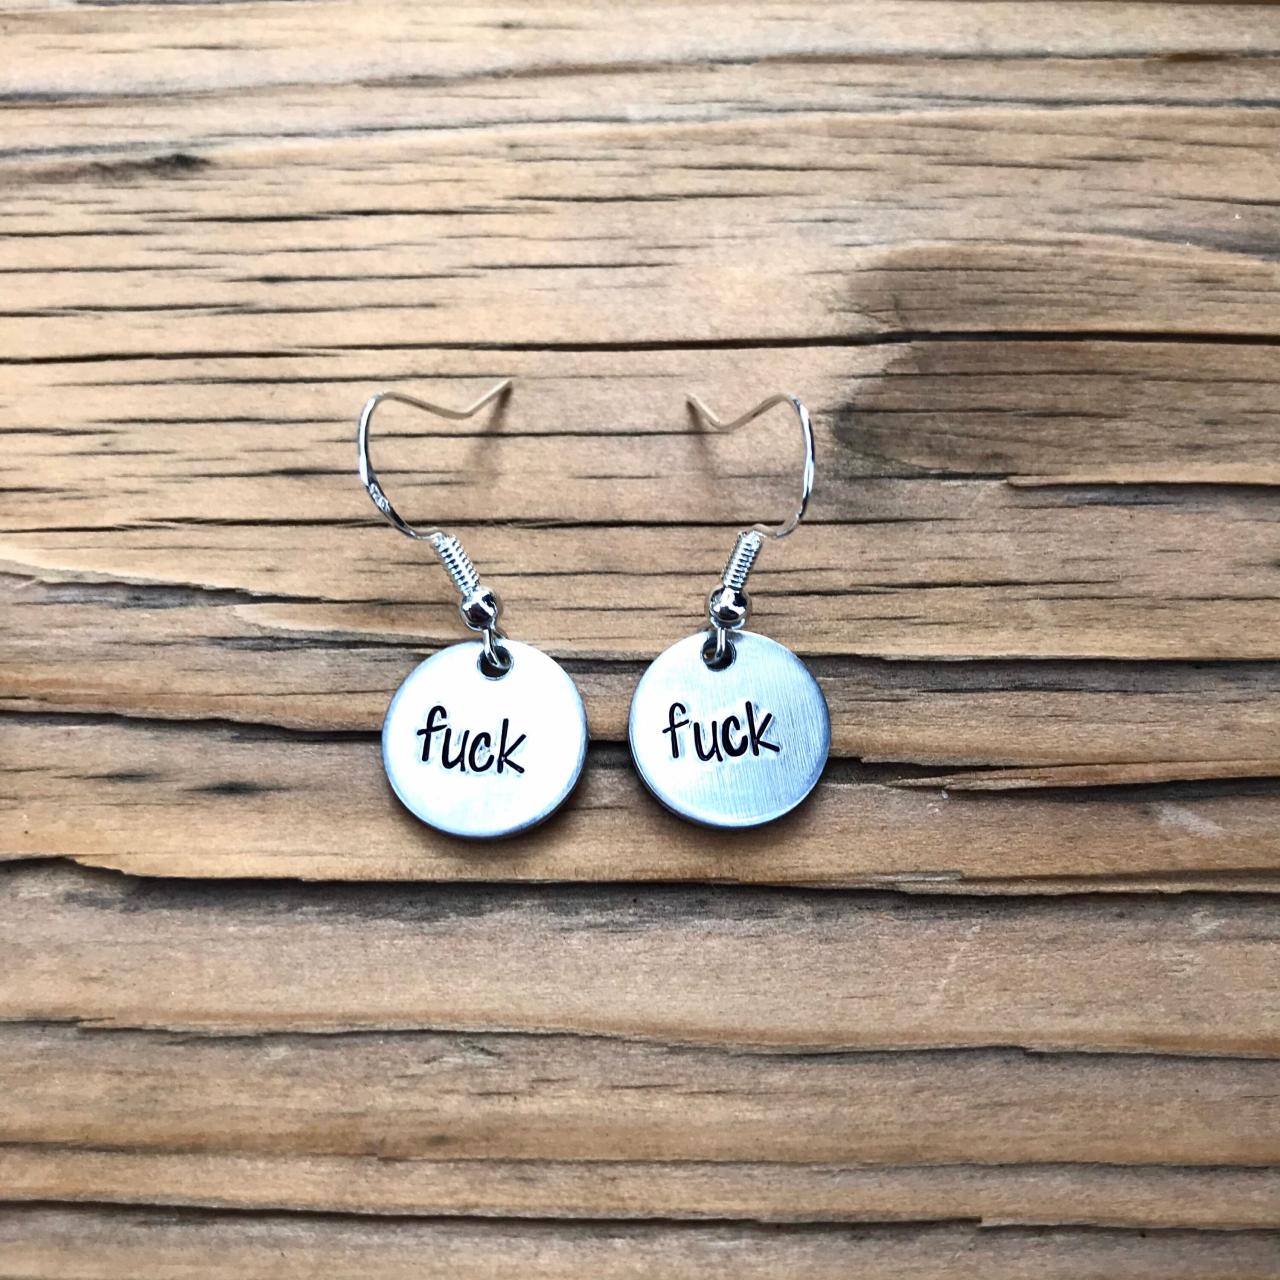 Earrings, Fuck Earrings, jewelry aluminum, hand stamped, silver, tiny, small, dainty, bad word, cuss word jewelry, naughty gifts, naughty